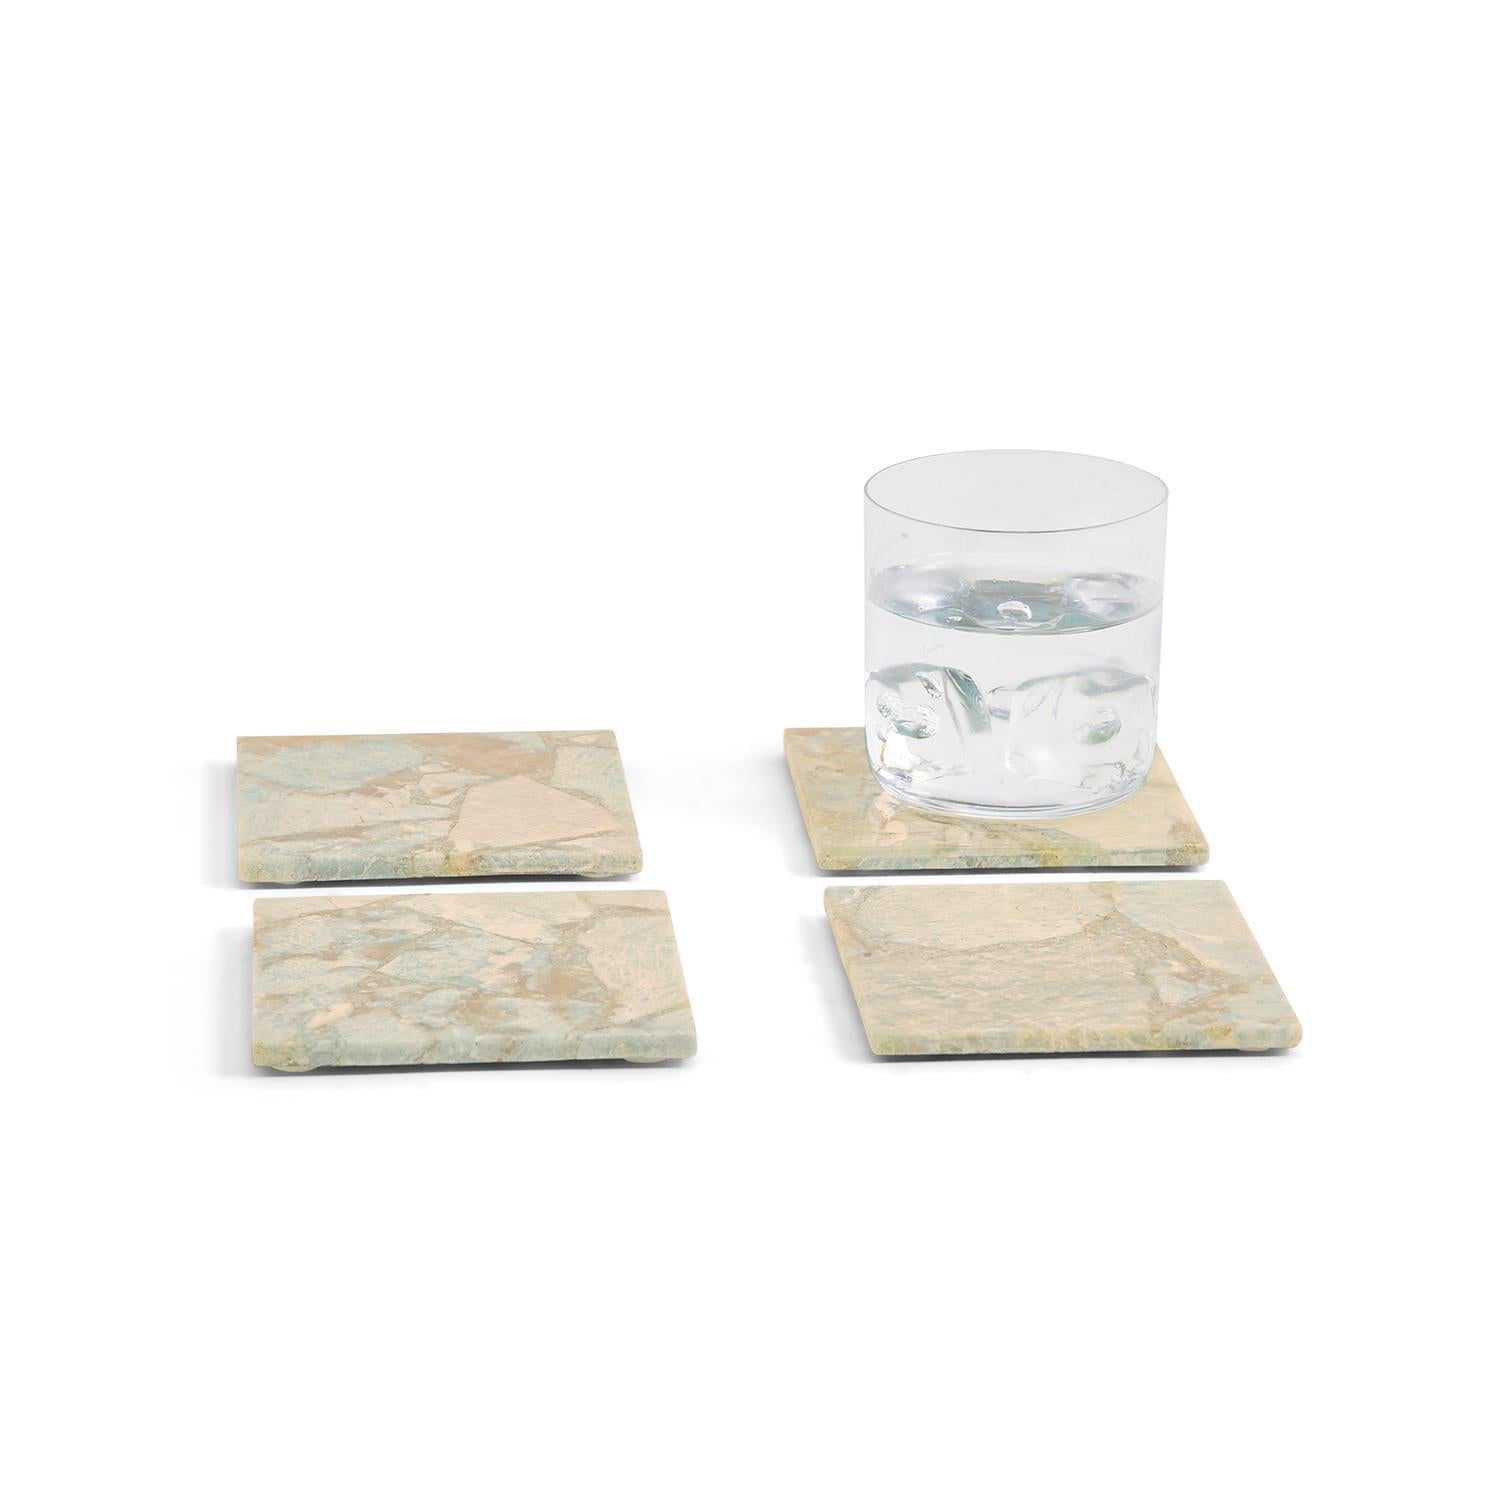 Two's Company S/4 Amazonite Coasters with Resin Base